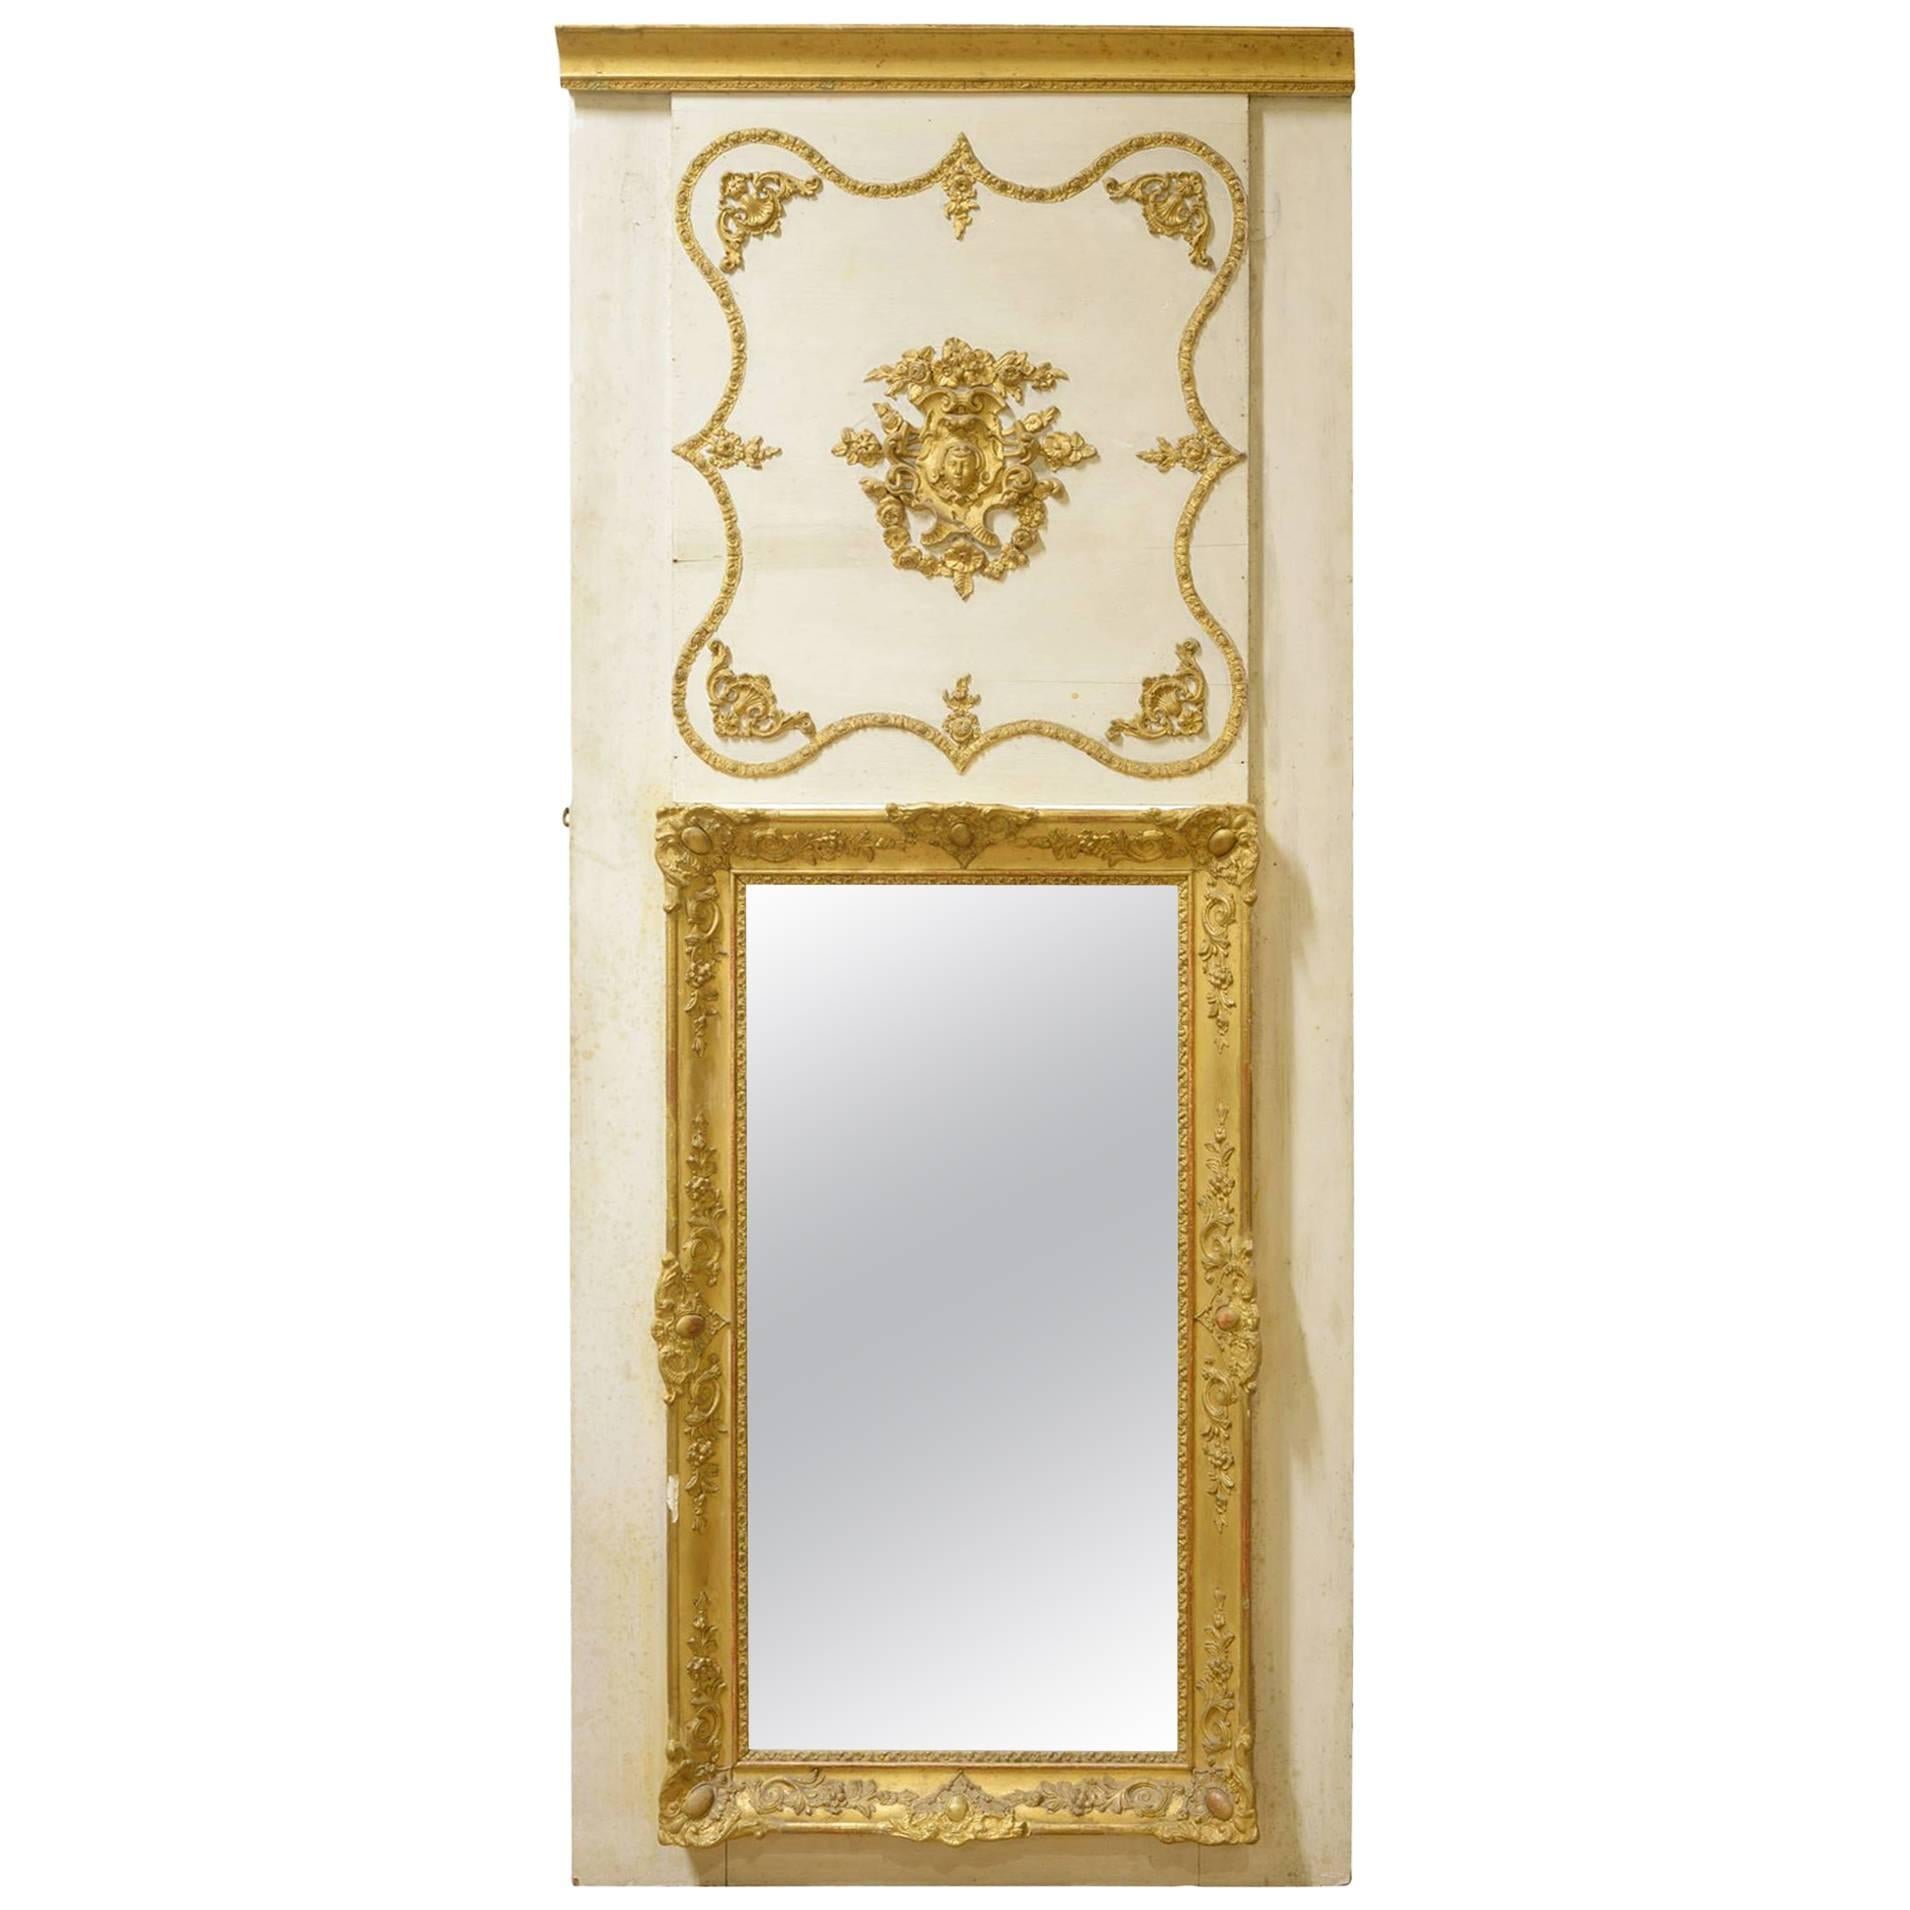 Continental White and Gilt Framed Trumeau Mirror